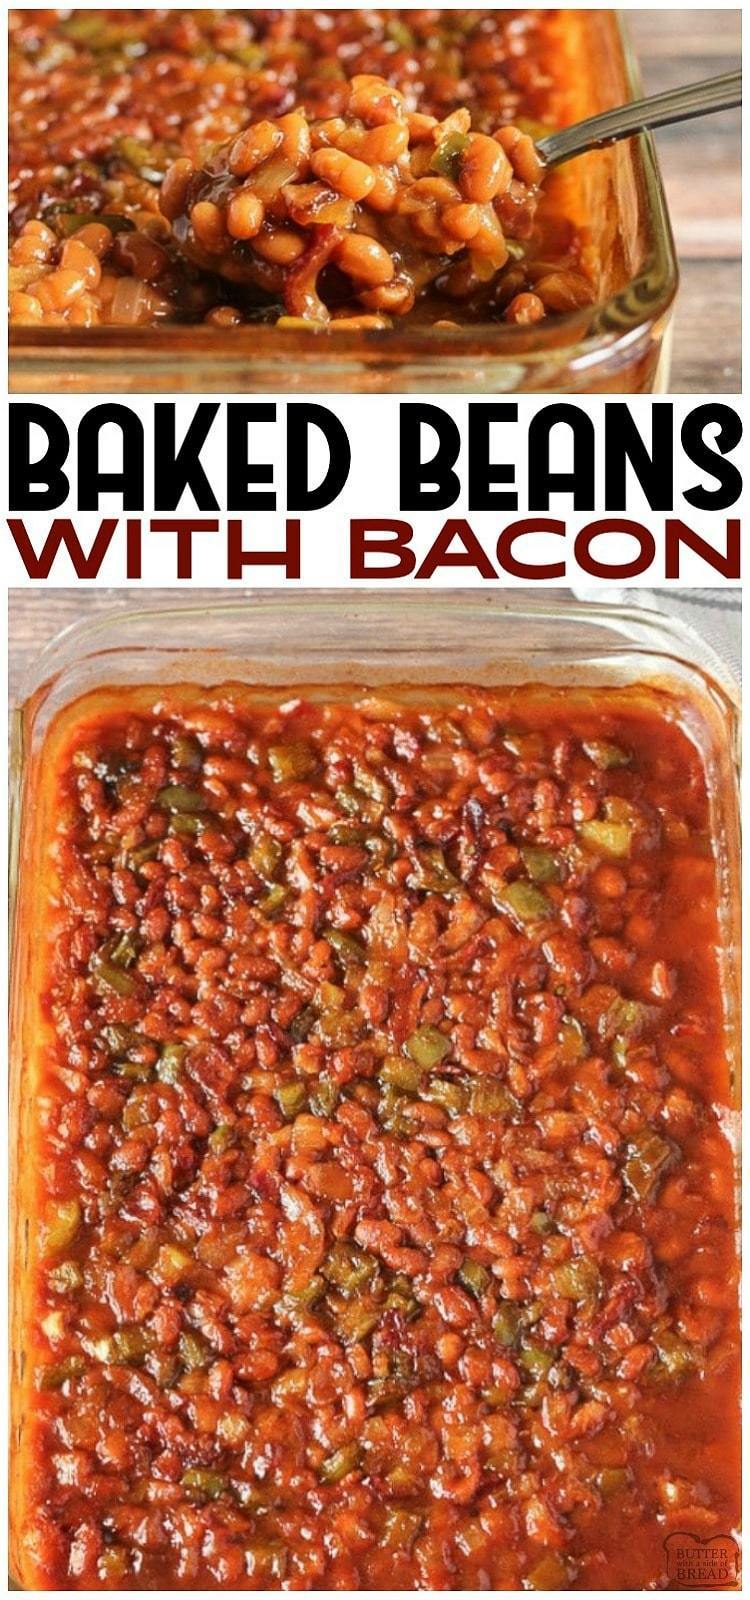 Baked Beans with Bacon recipe is a classic baked bean recipe loaded with bacon, green peppers, pork and beans and the perfect blend of seasonings! Take this baked beans recipe with bacon dish along for your next BBQ potluck. #beans #bakedbeans #bbq #bacon #sidedish #grilling #recipe from BUTTER WITH A SIDE OF BREAD